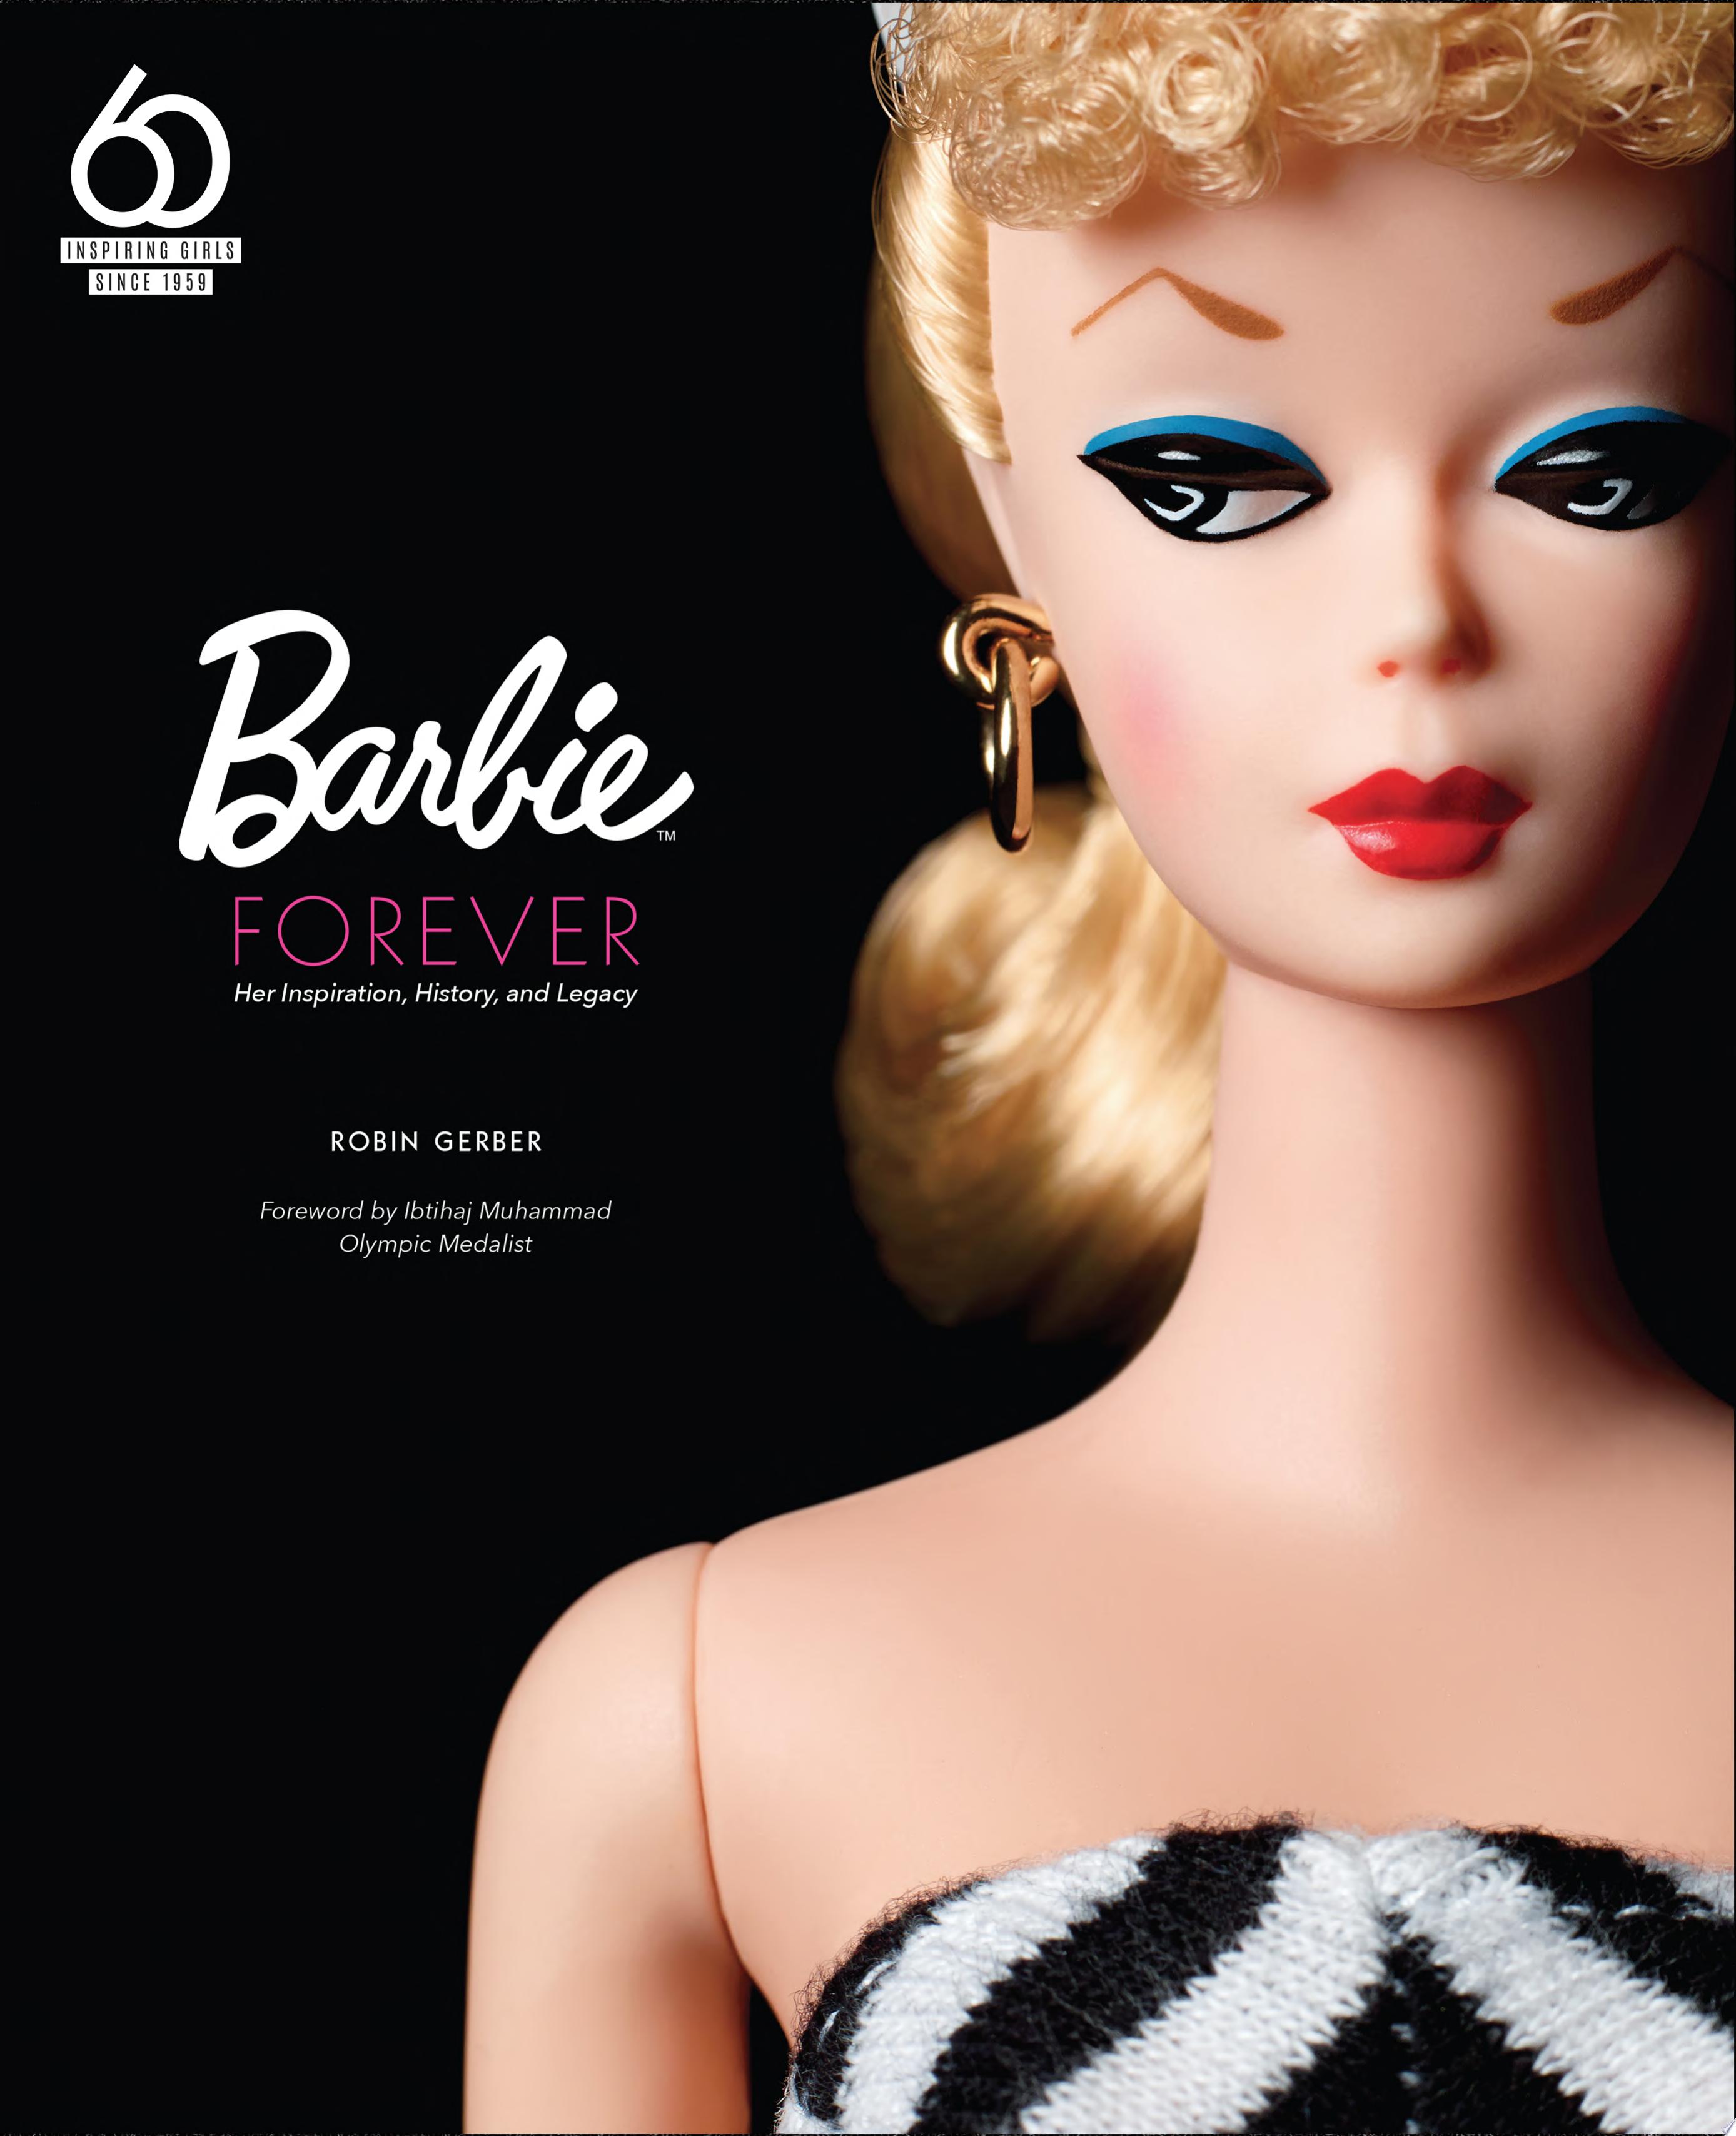 Image for "Barbie Forever: her inspiration, history, and legacy"